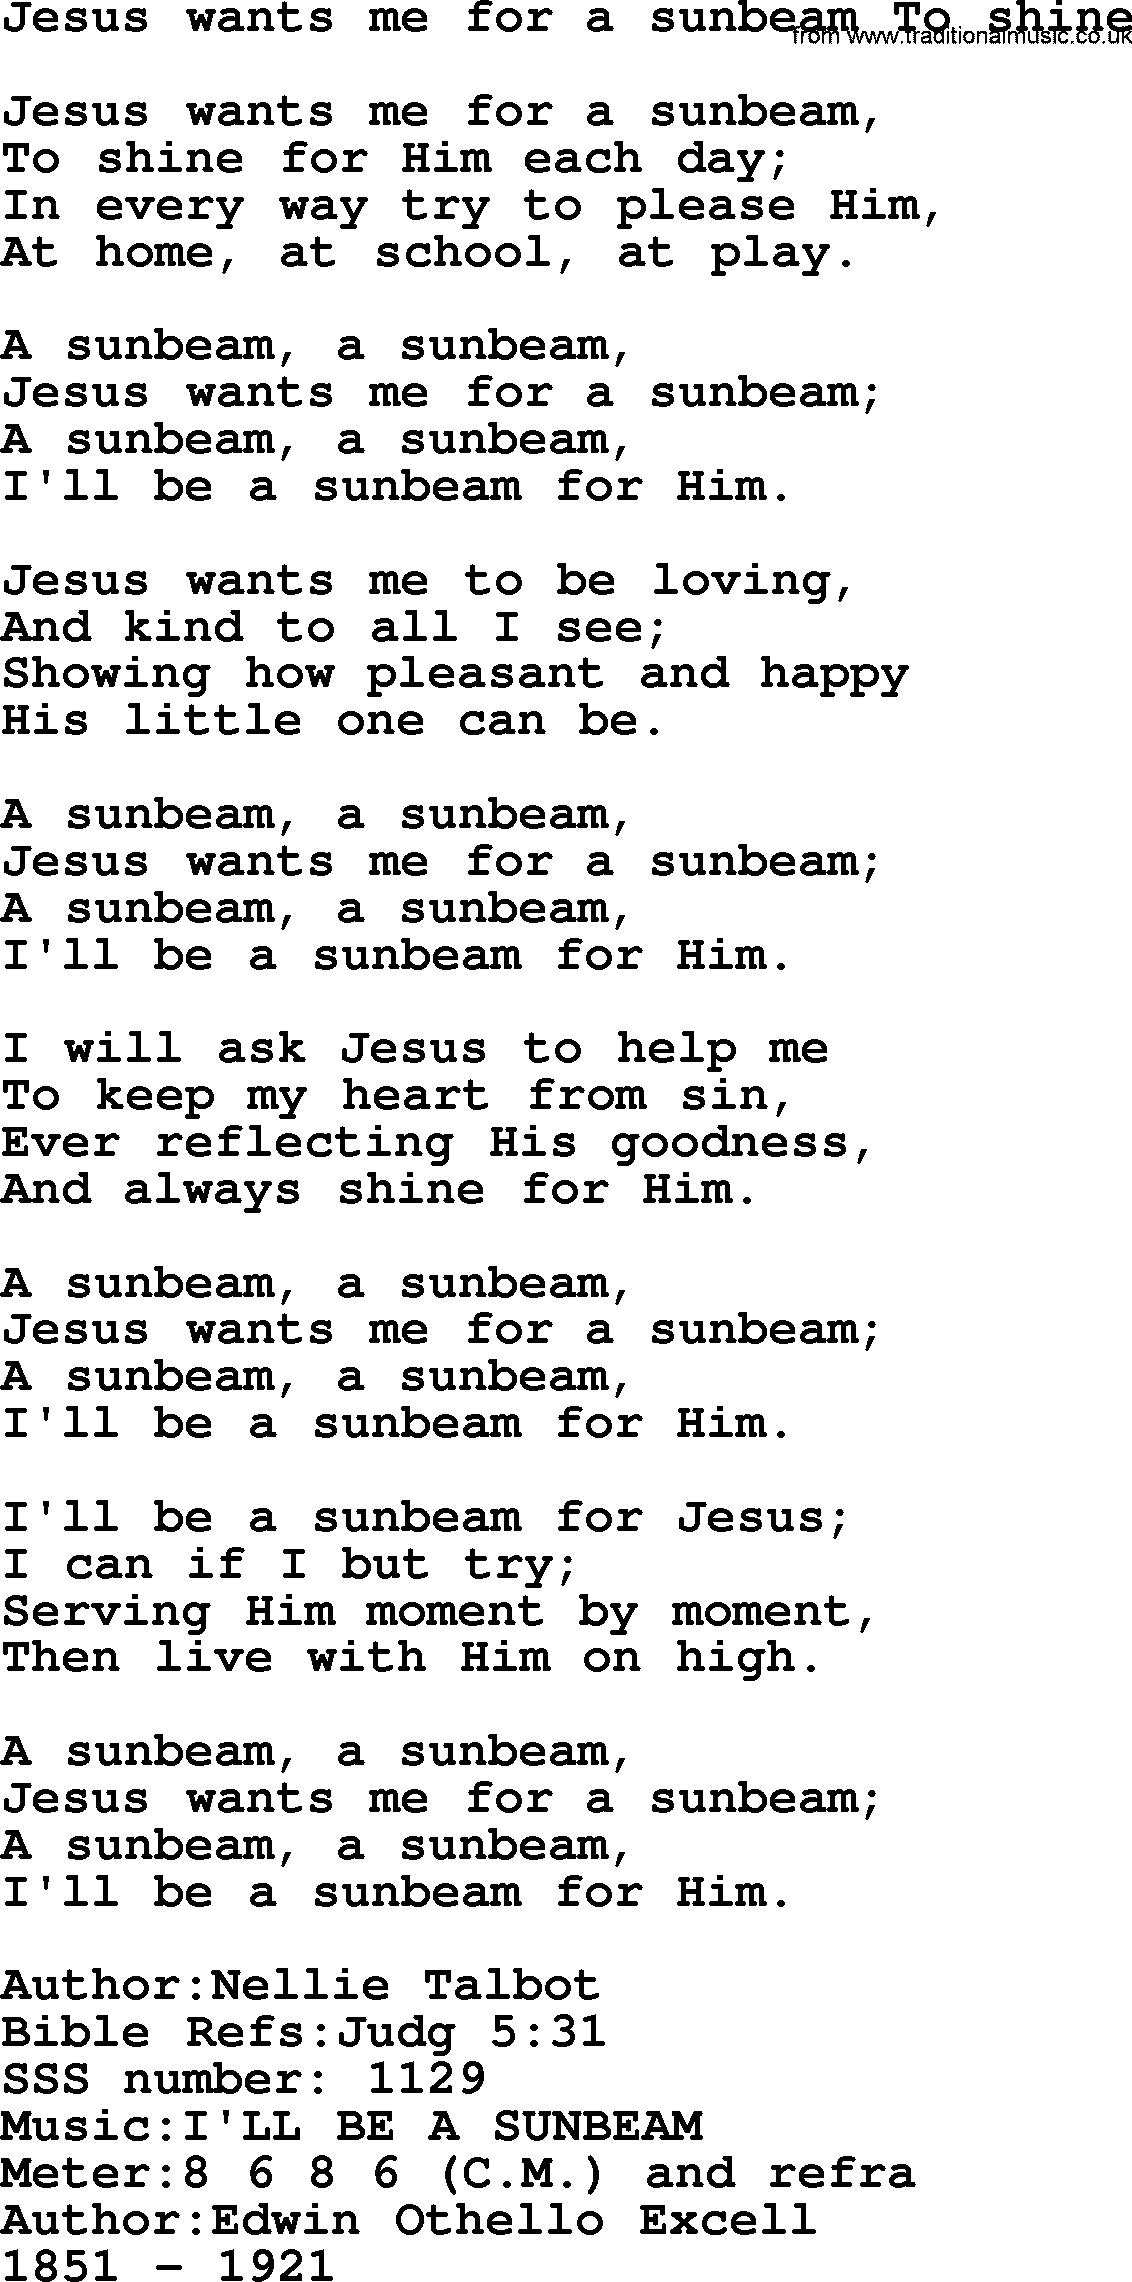 Sacred Songs and Solos complete, 1200 Hymns, title: Jesus Wants Me For A Sunbeam To Shine, lyrics and PDF